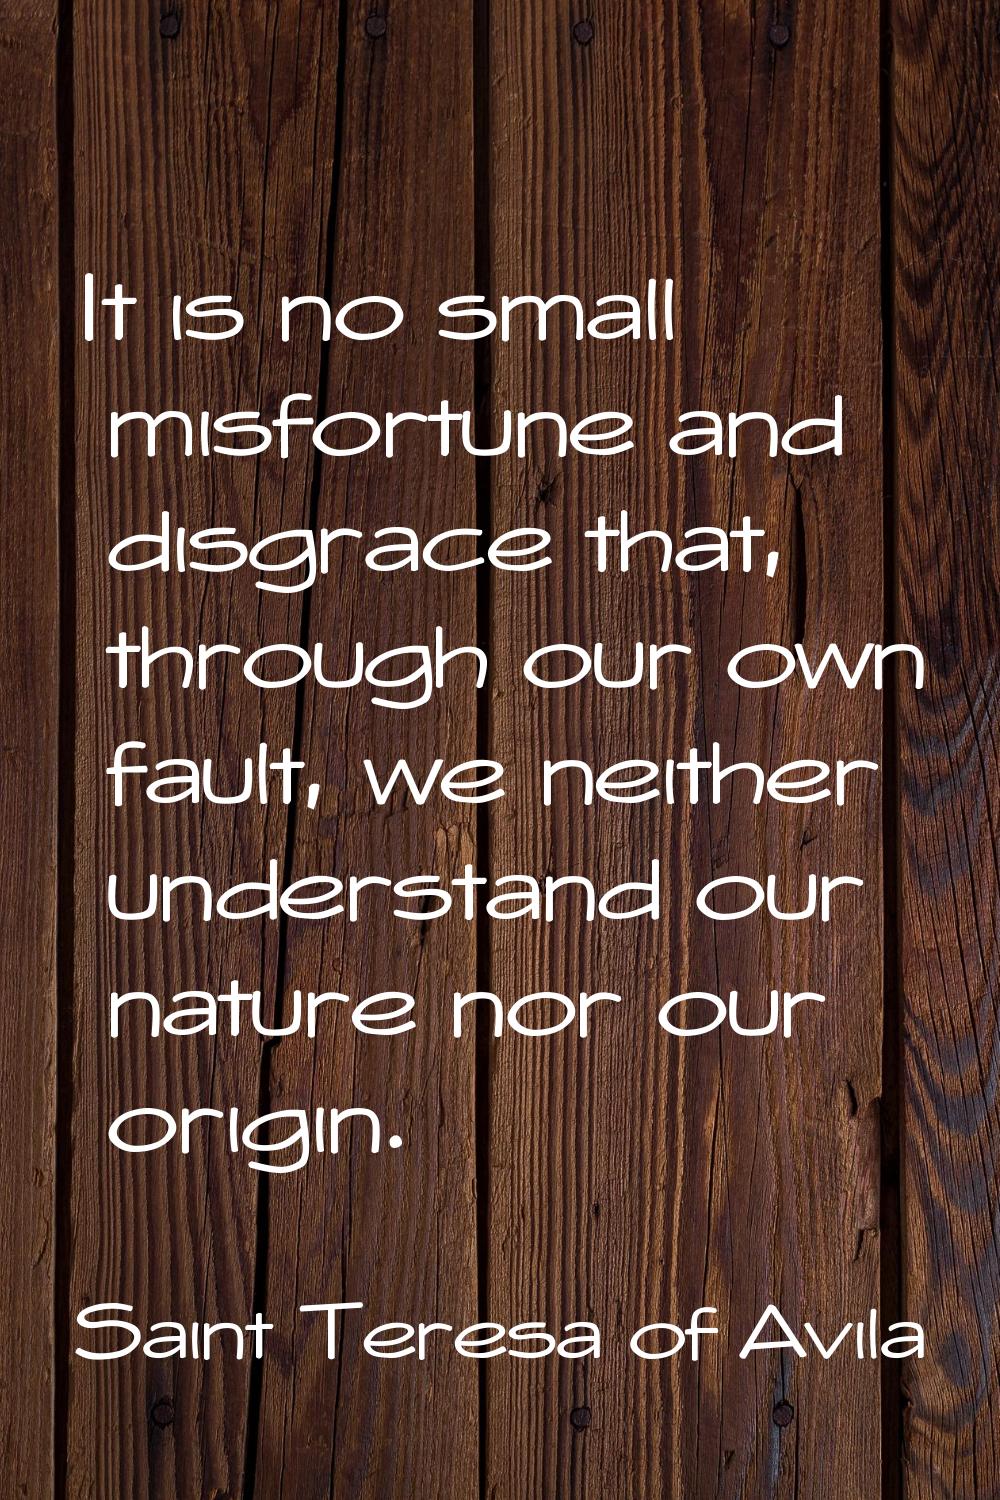 It is no small misfortune and disgrace that, through our own fault, we neither understand our natur